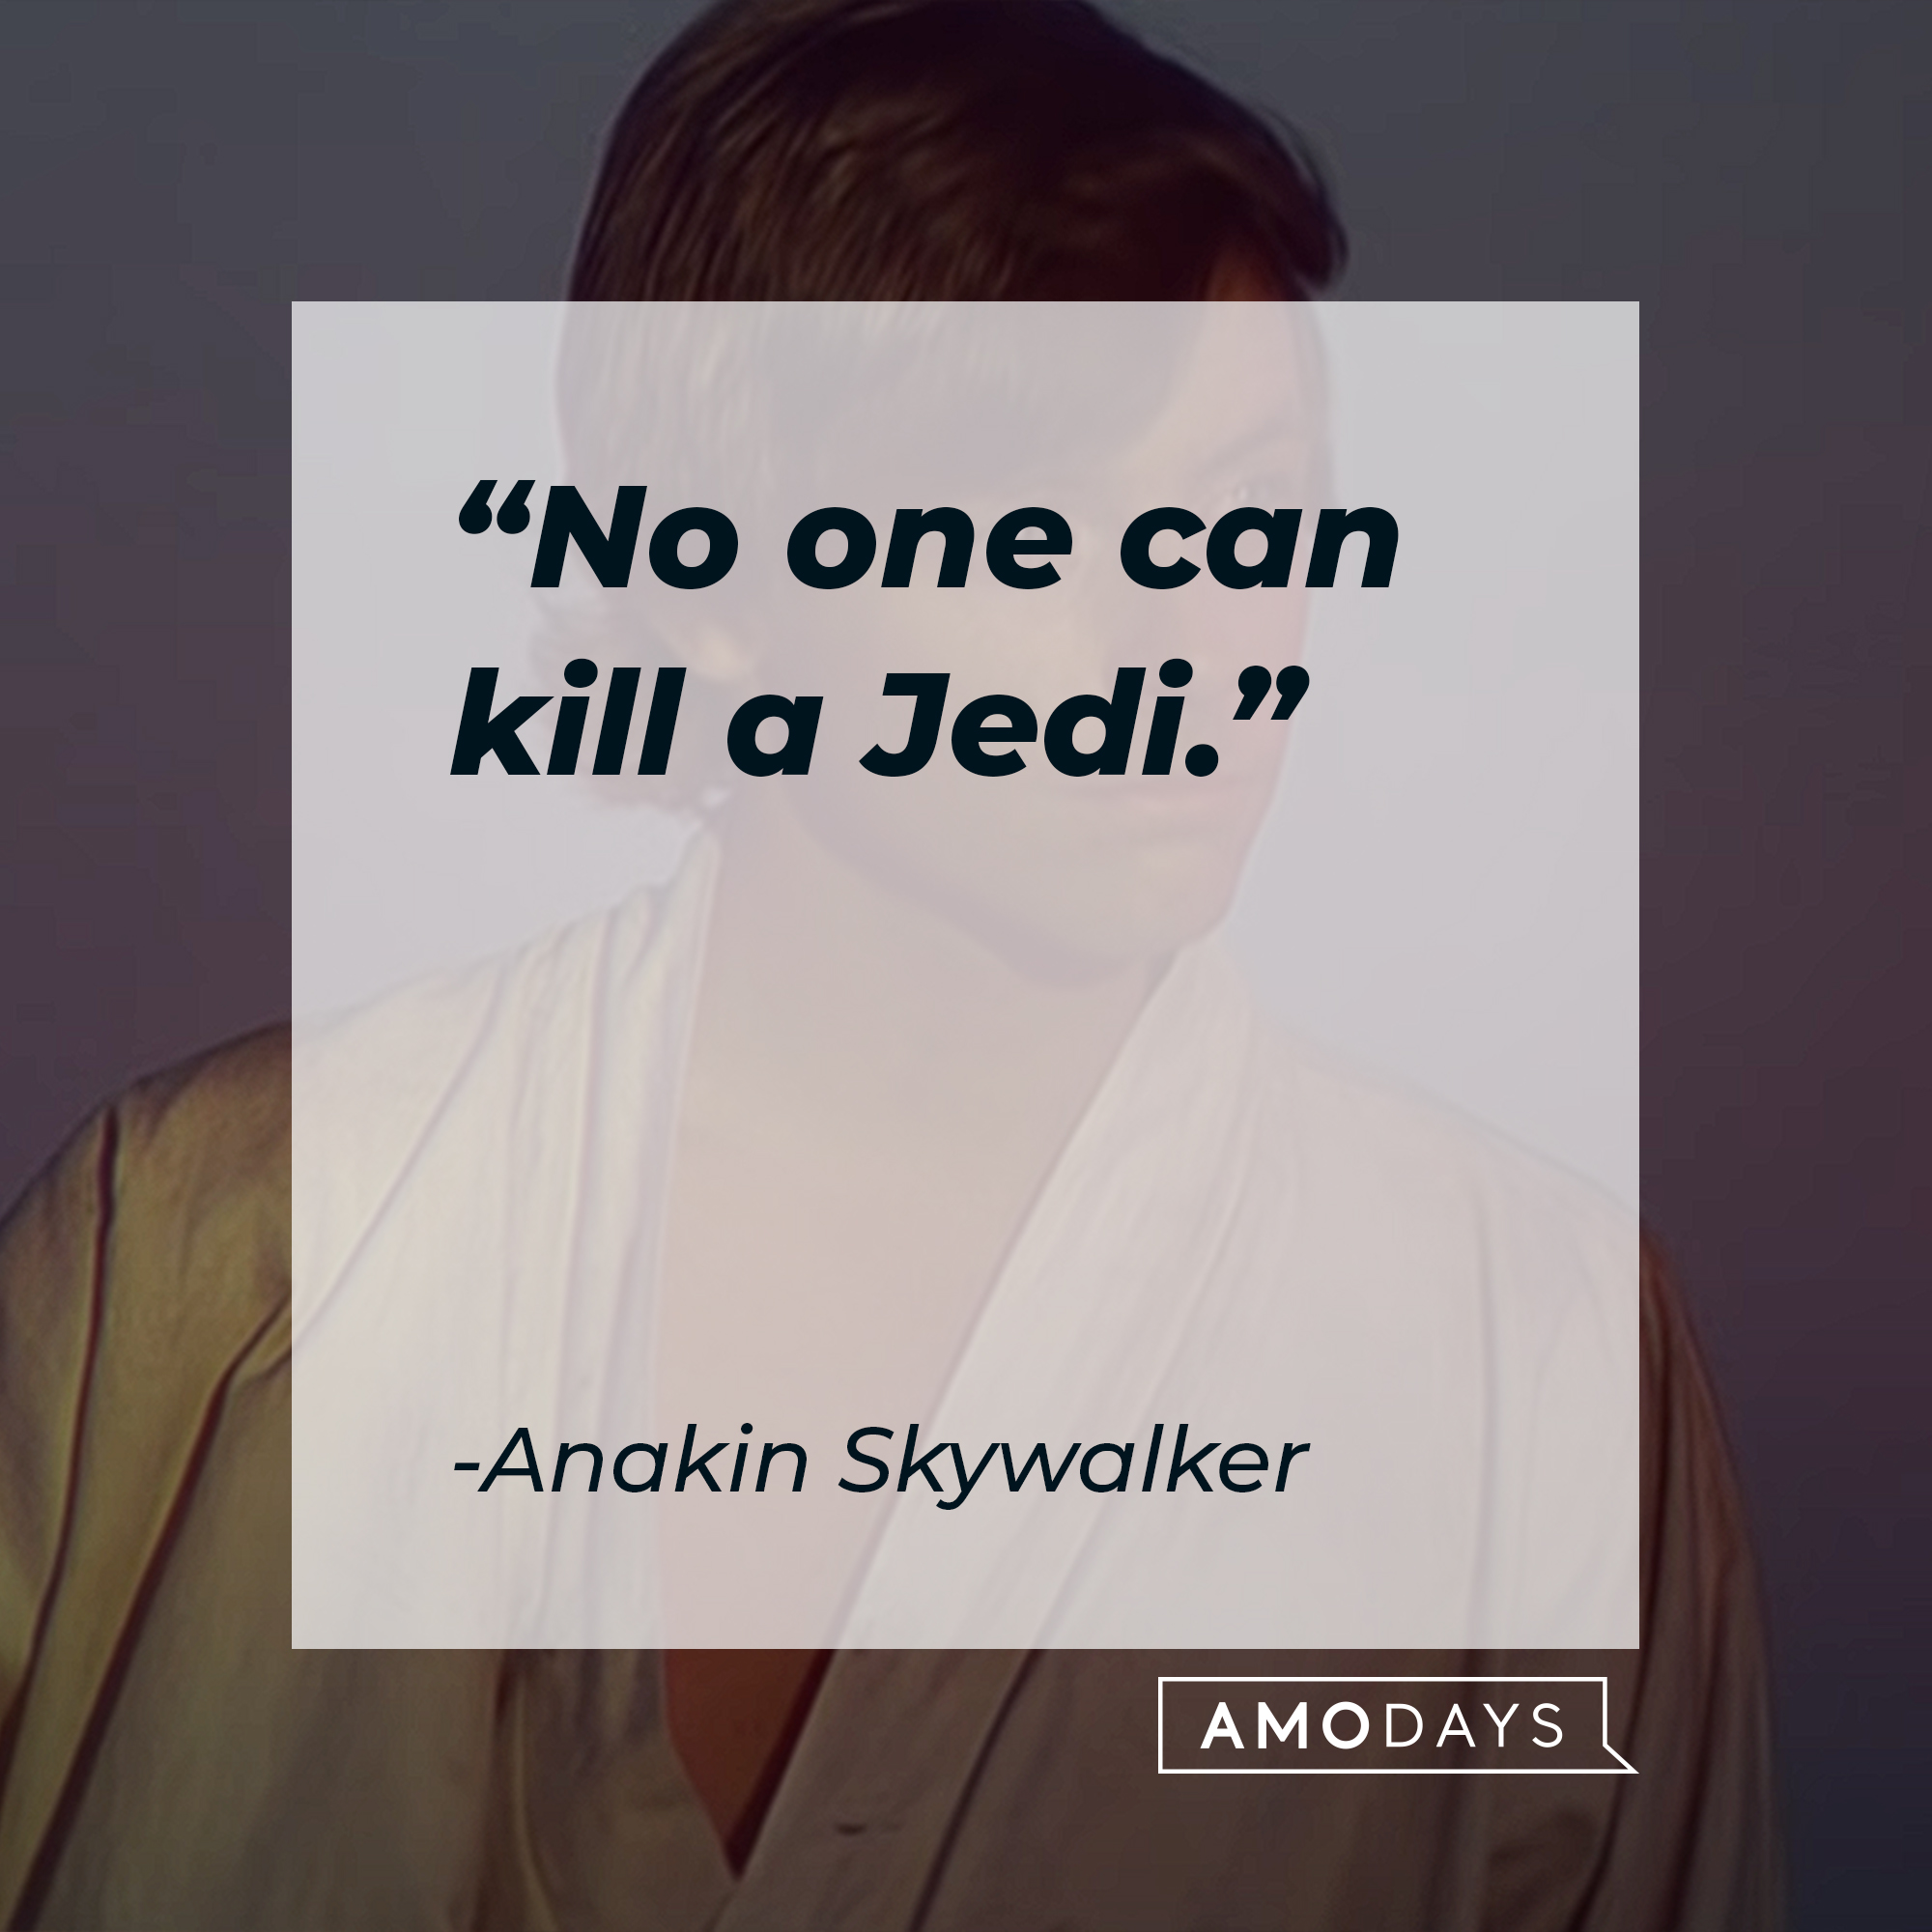 Anakin Skywalker with his quote: "No one can kill a Jedi." | Source: Youtube/StarWars